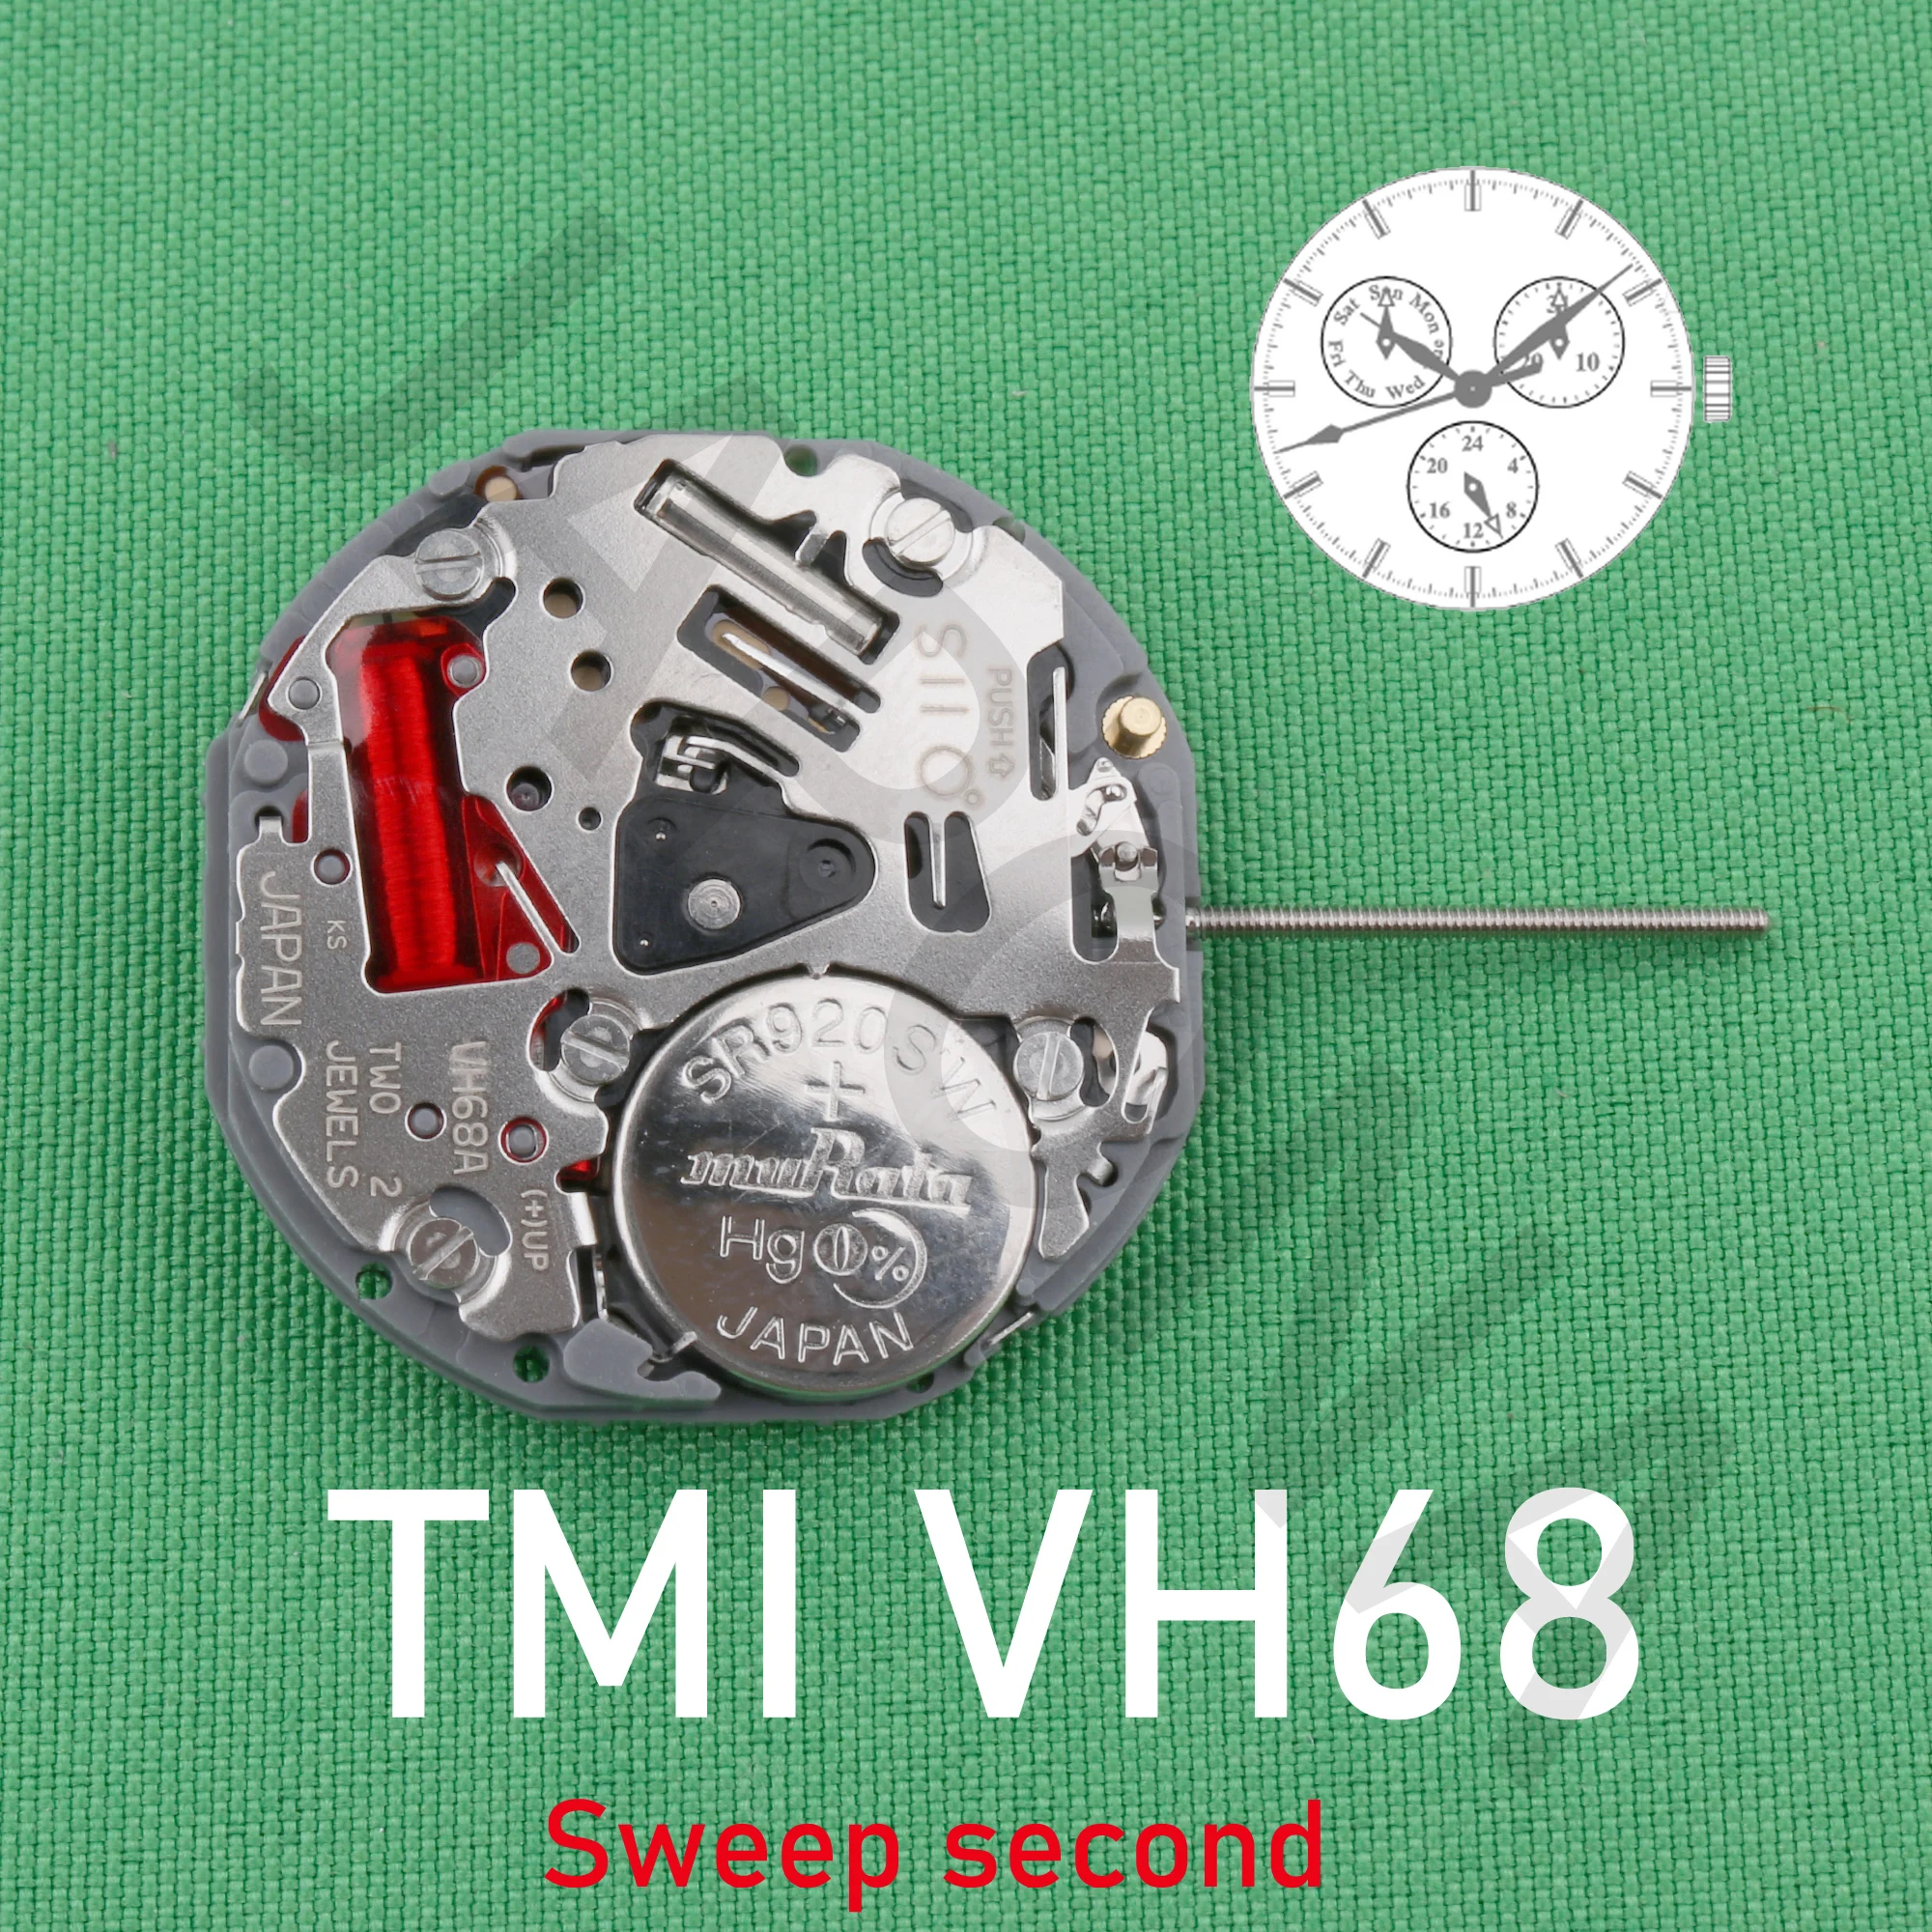 TMI VH68 Sweep second Multi-eye (day, date, 24 hr) JAPAN QUARTZ MOVEMENT VH68A small hands at 2/6/10 enlarge